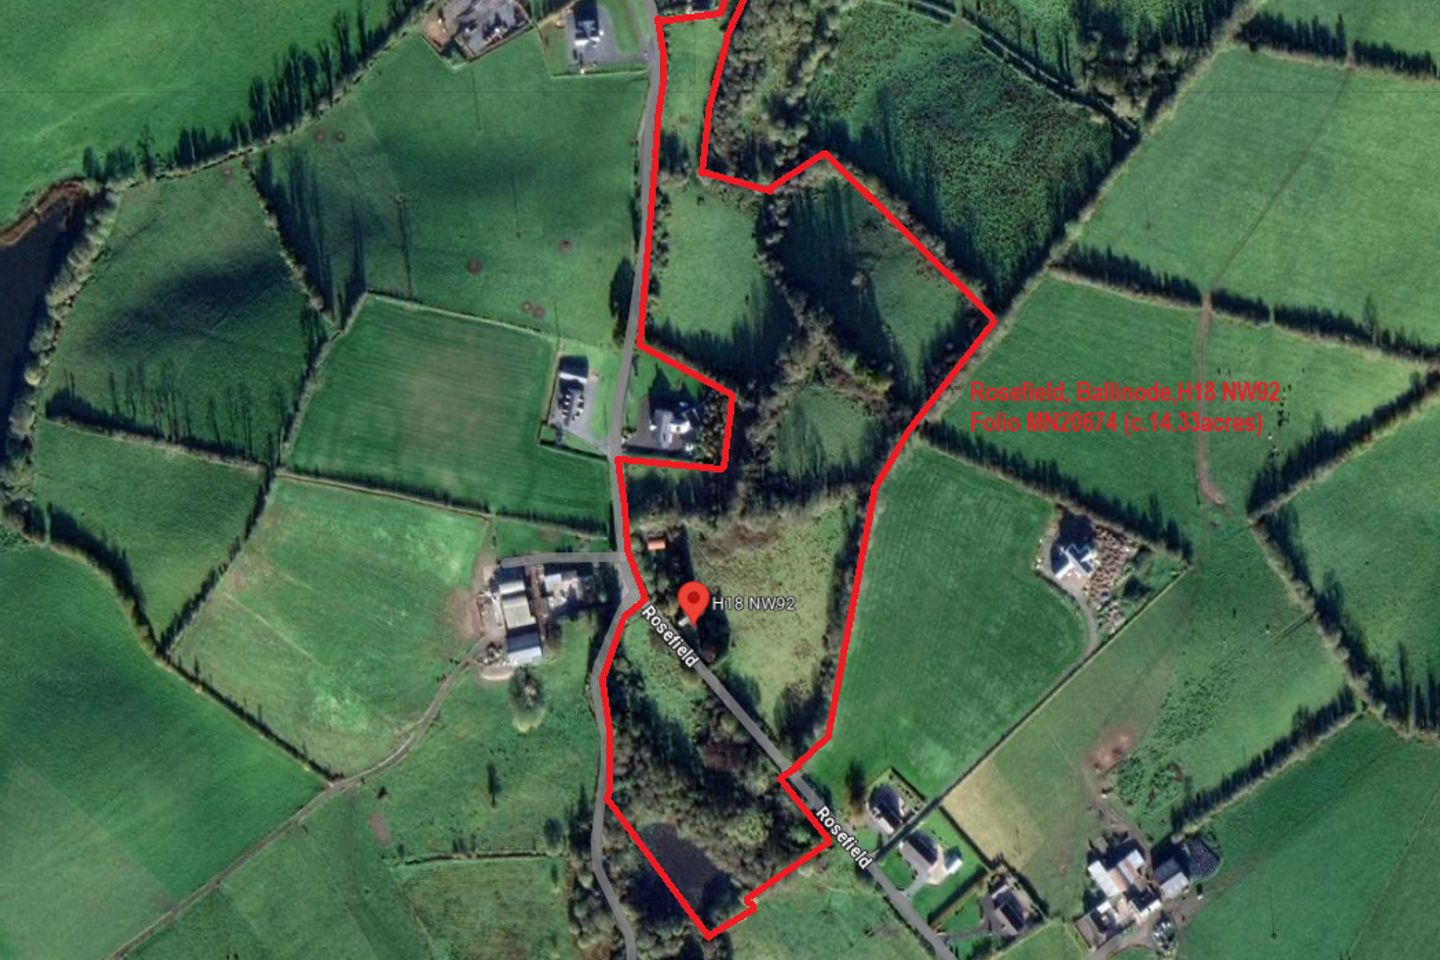 c.14.33acre Residential Farm at Rosefield, Ballinode, Co. Monaghan, H18NW92